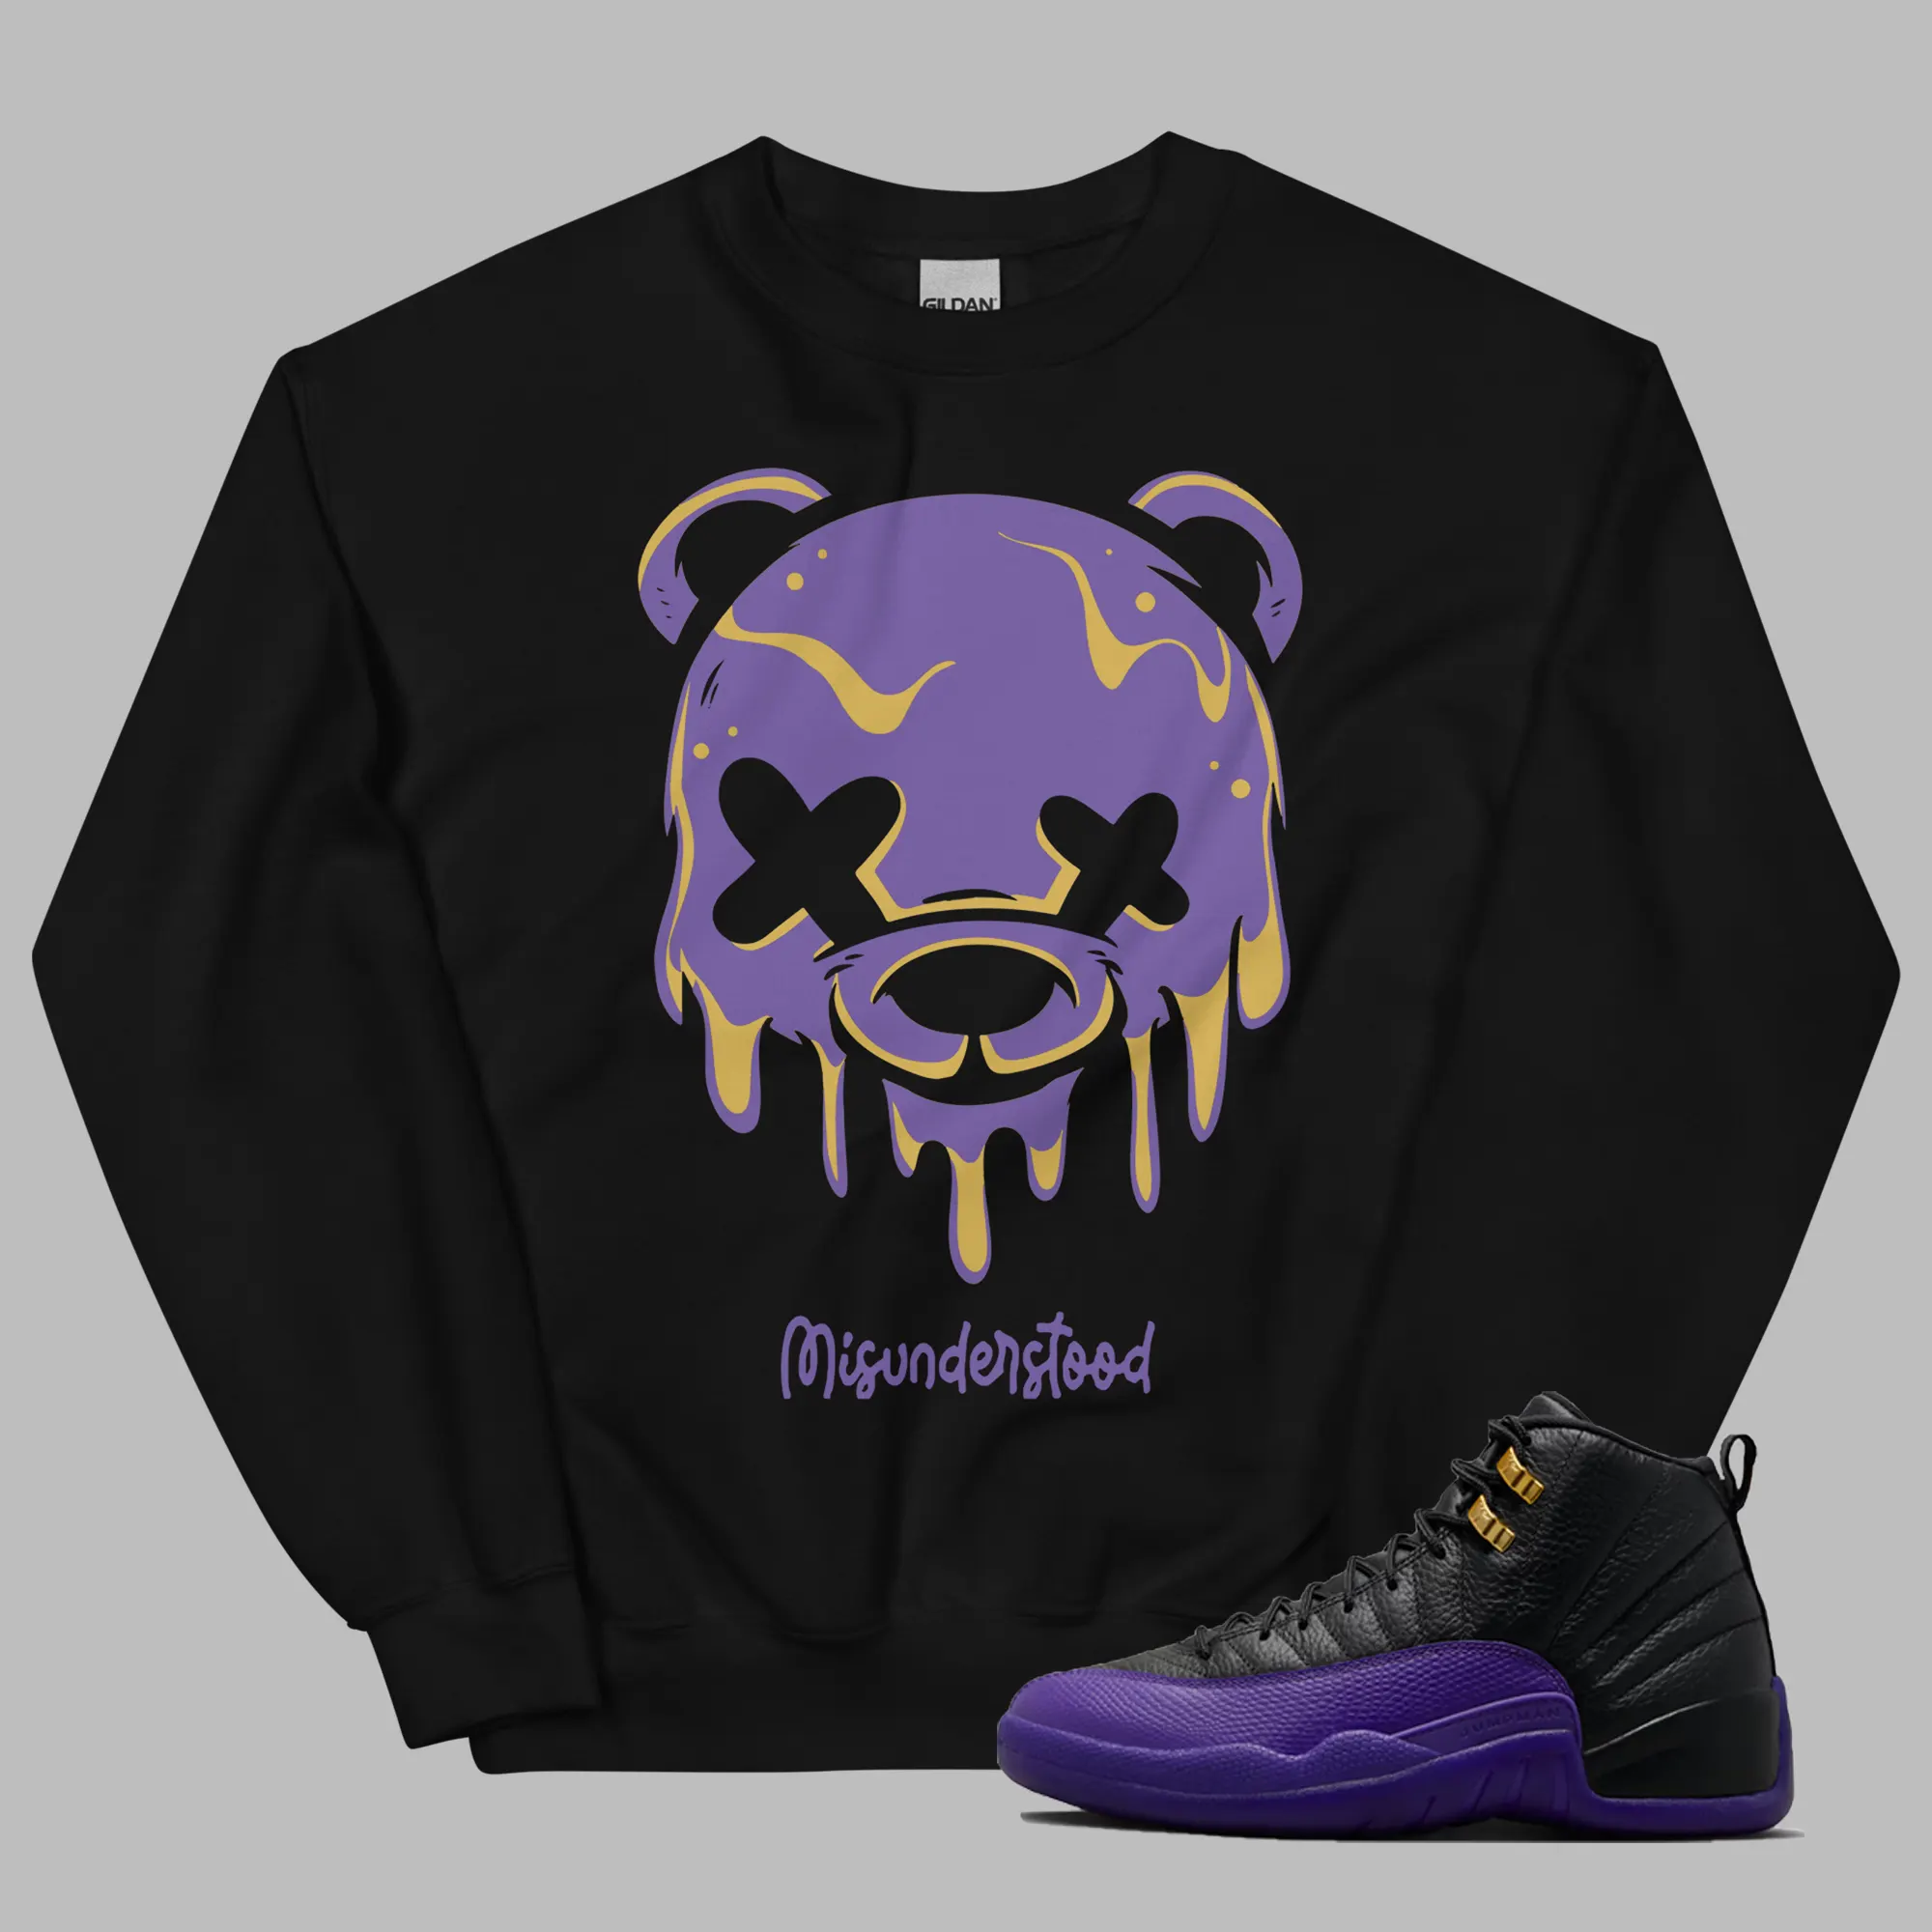 Air Jordan 12 Field Purple Sweater Outfit Dripping Bear Graphic